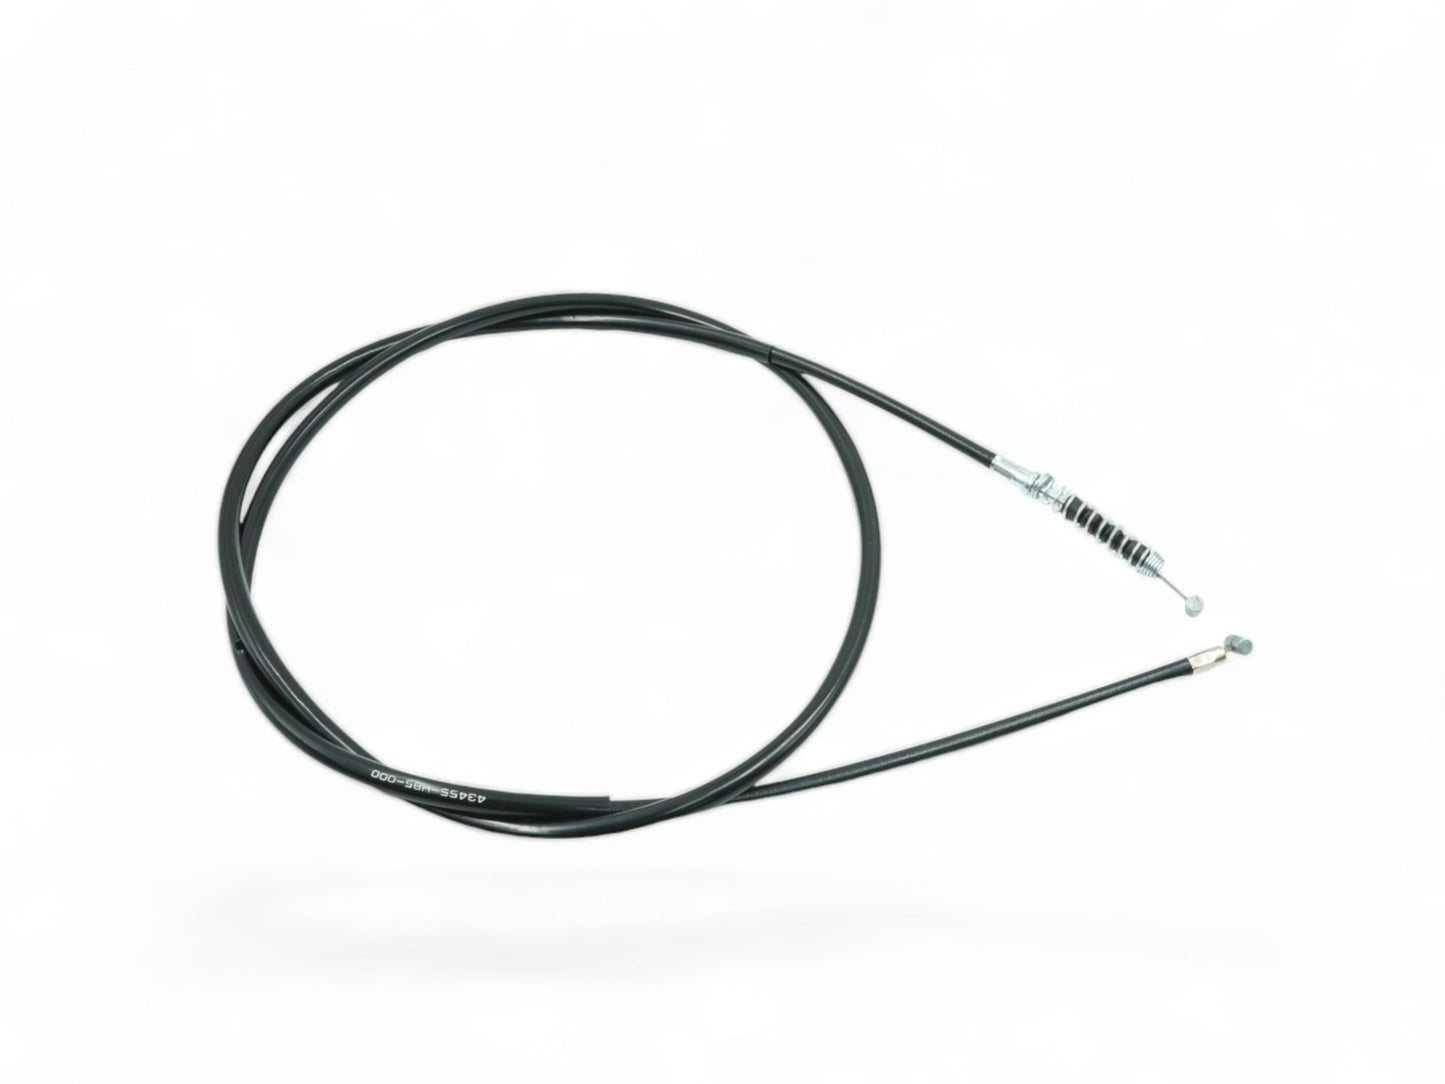 New Replacement Rear Hand Brake Cable Fits Honda 2009 TRX300x